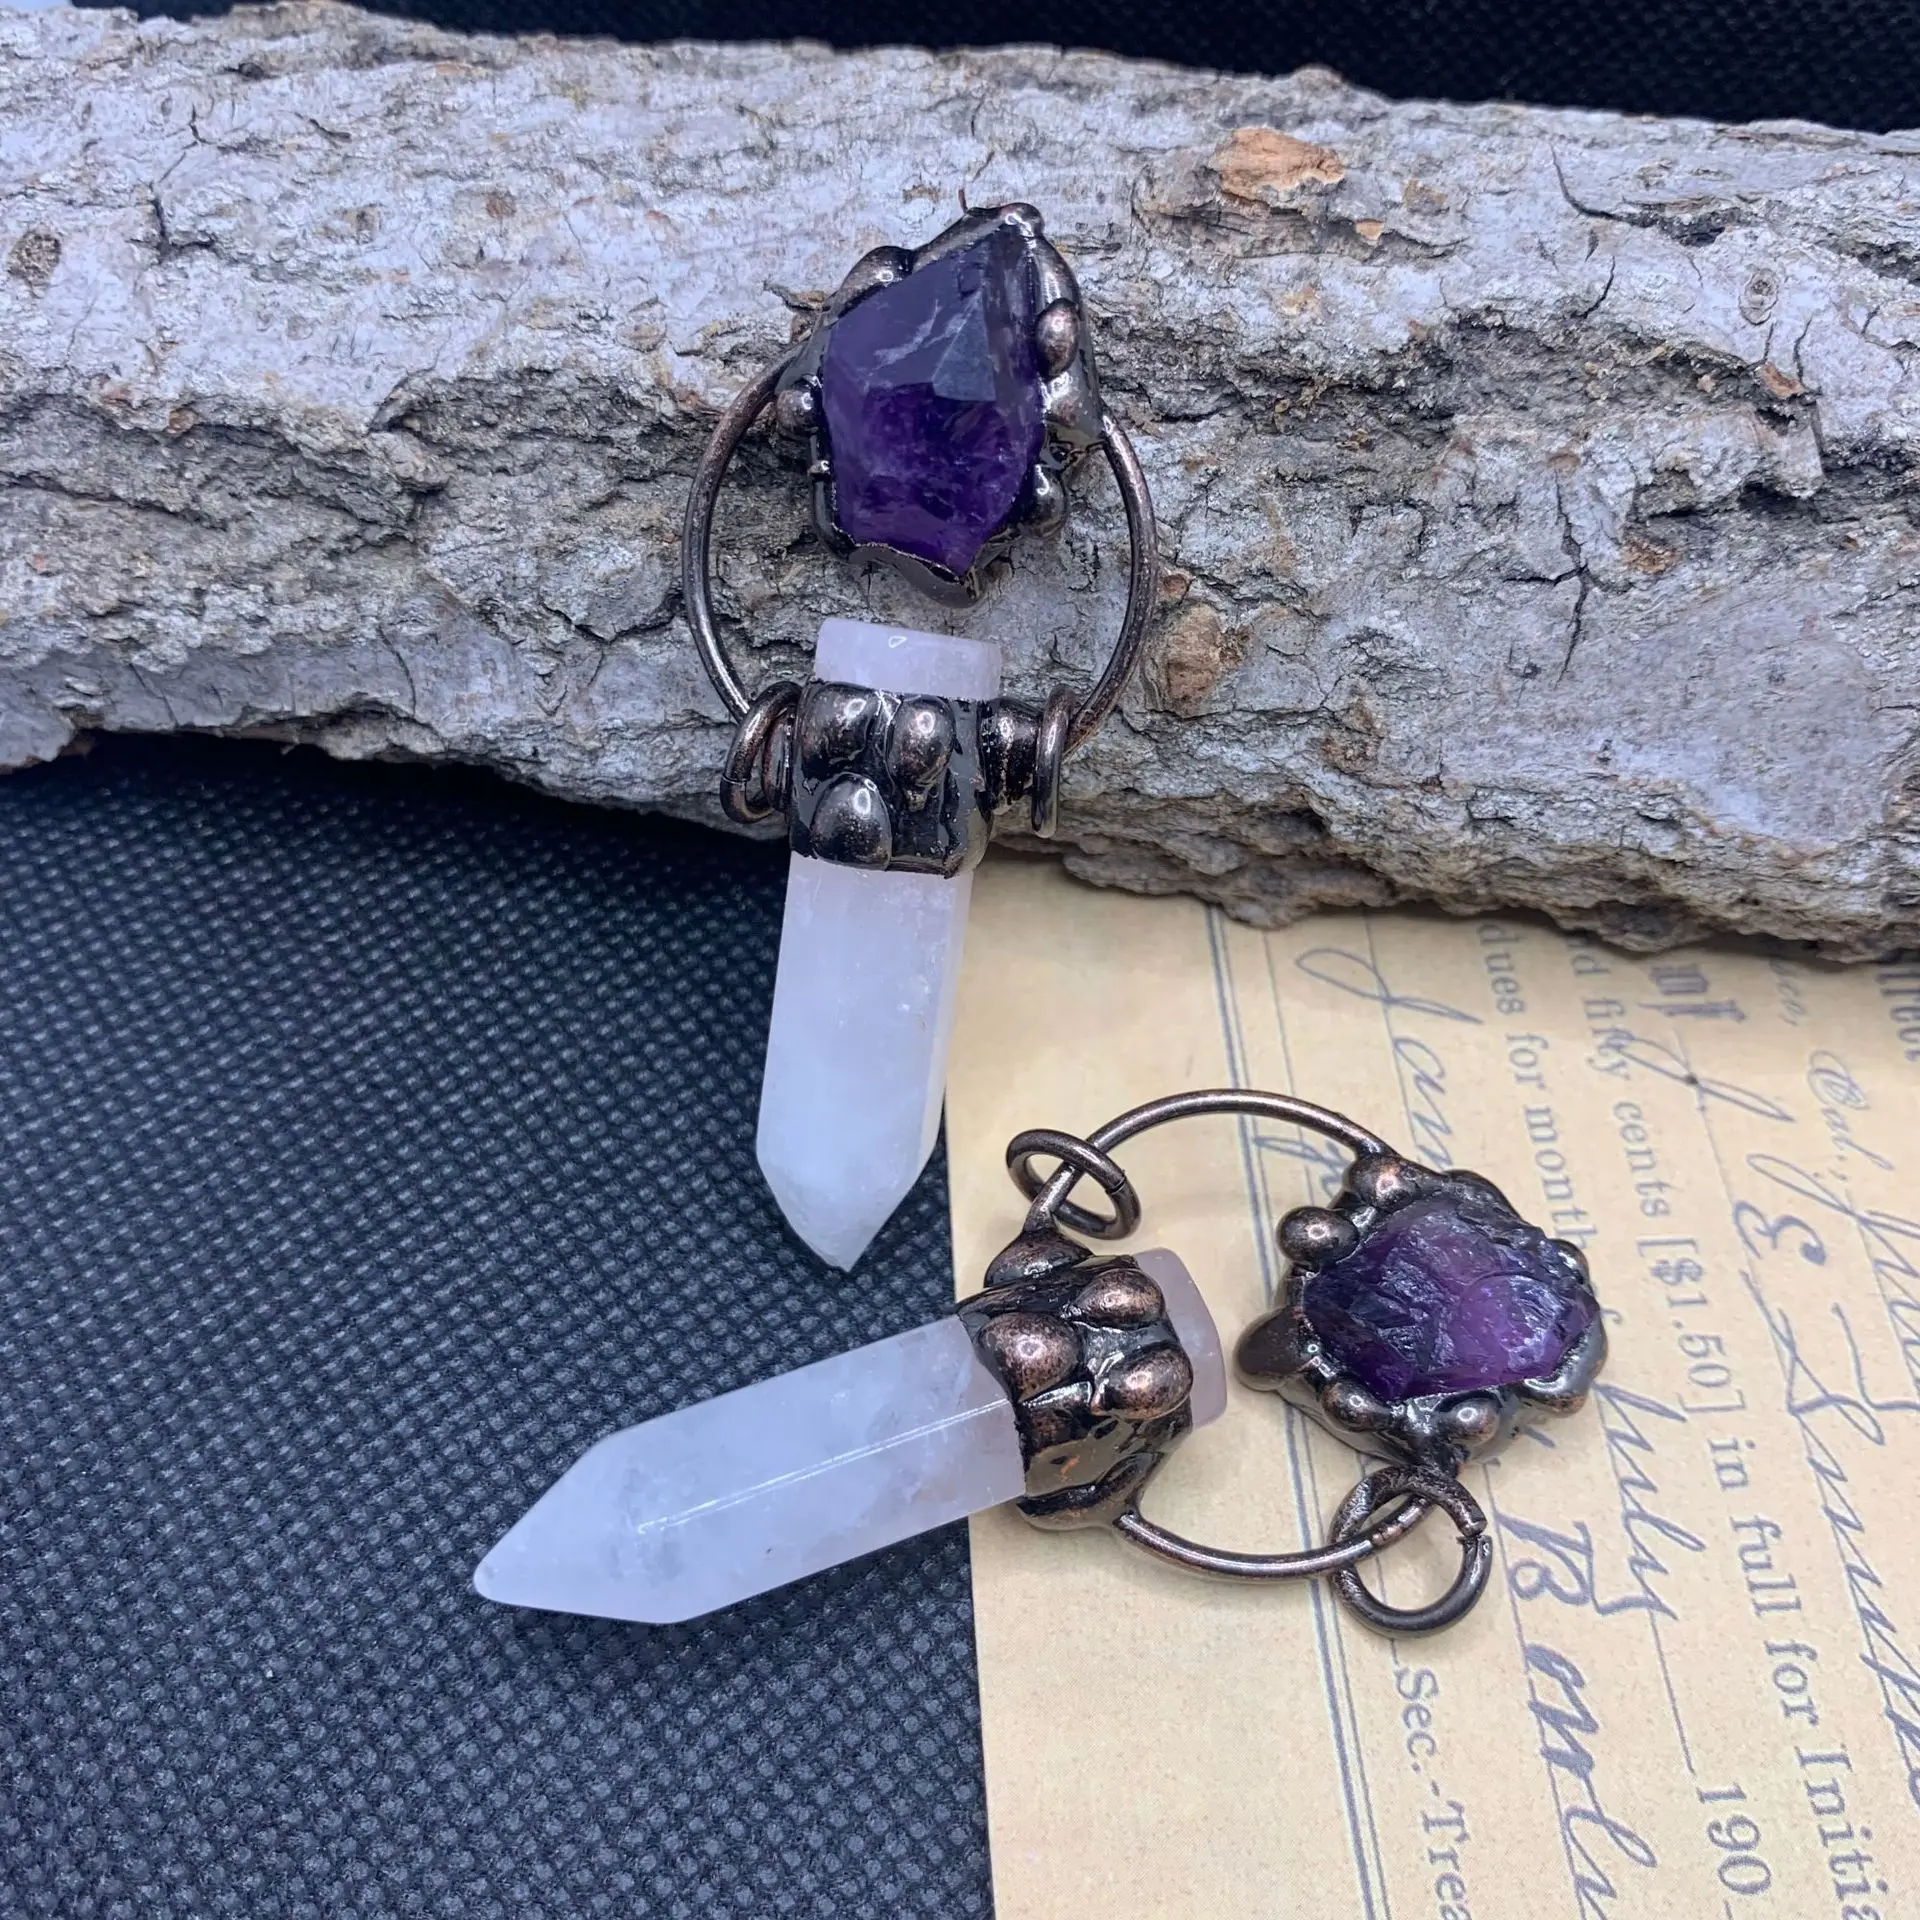 

Natural White Crystal Hexagonal Prism Pendant Freeform Amethysts Raw Stone Bronze Charms Antique Copper Vintage Necklace DIY